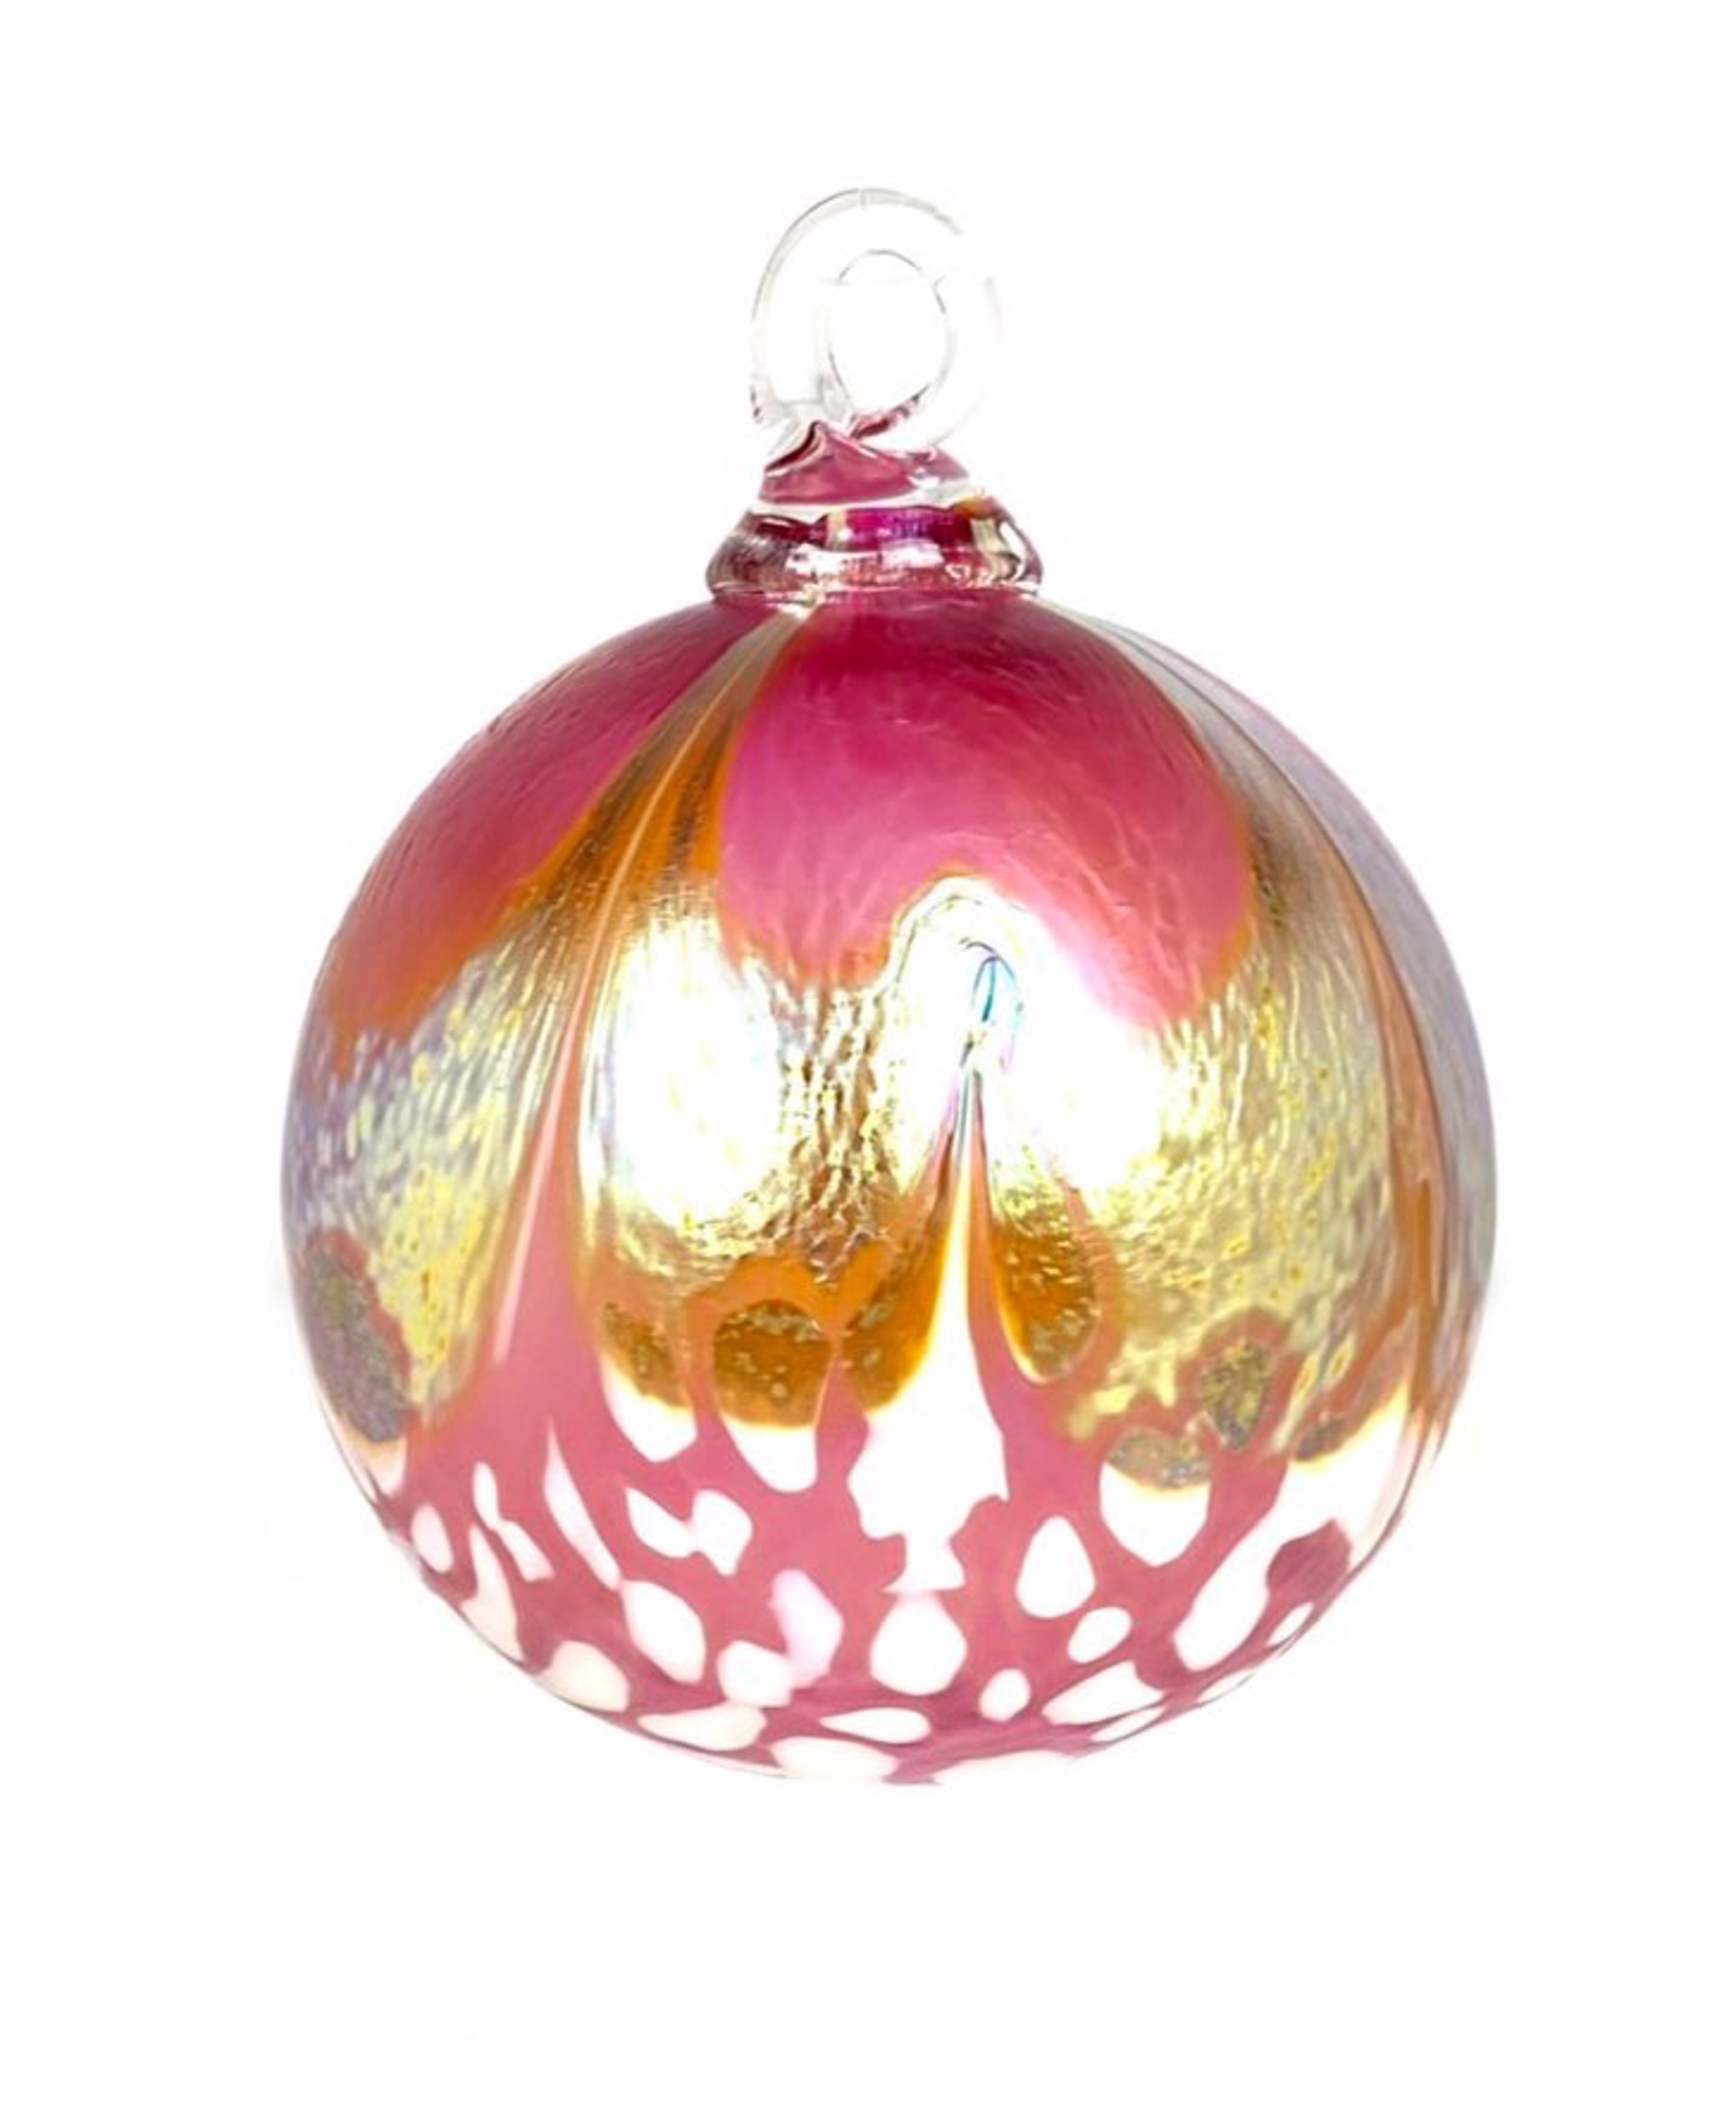 Artisan Punch Pink Ornament by Furnace Glass